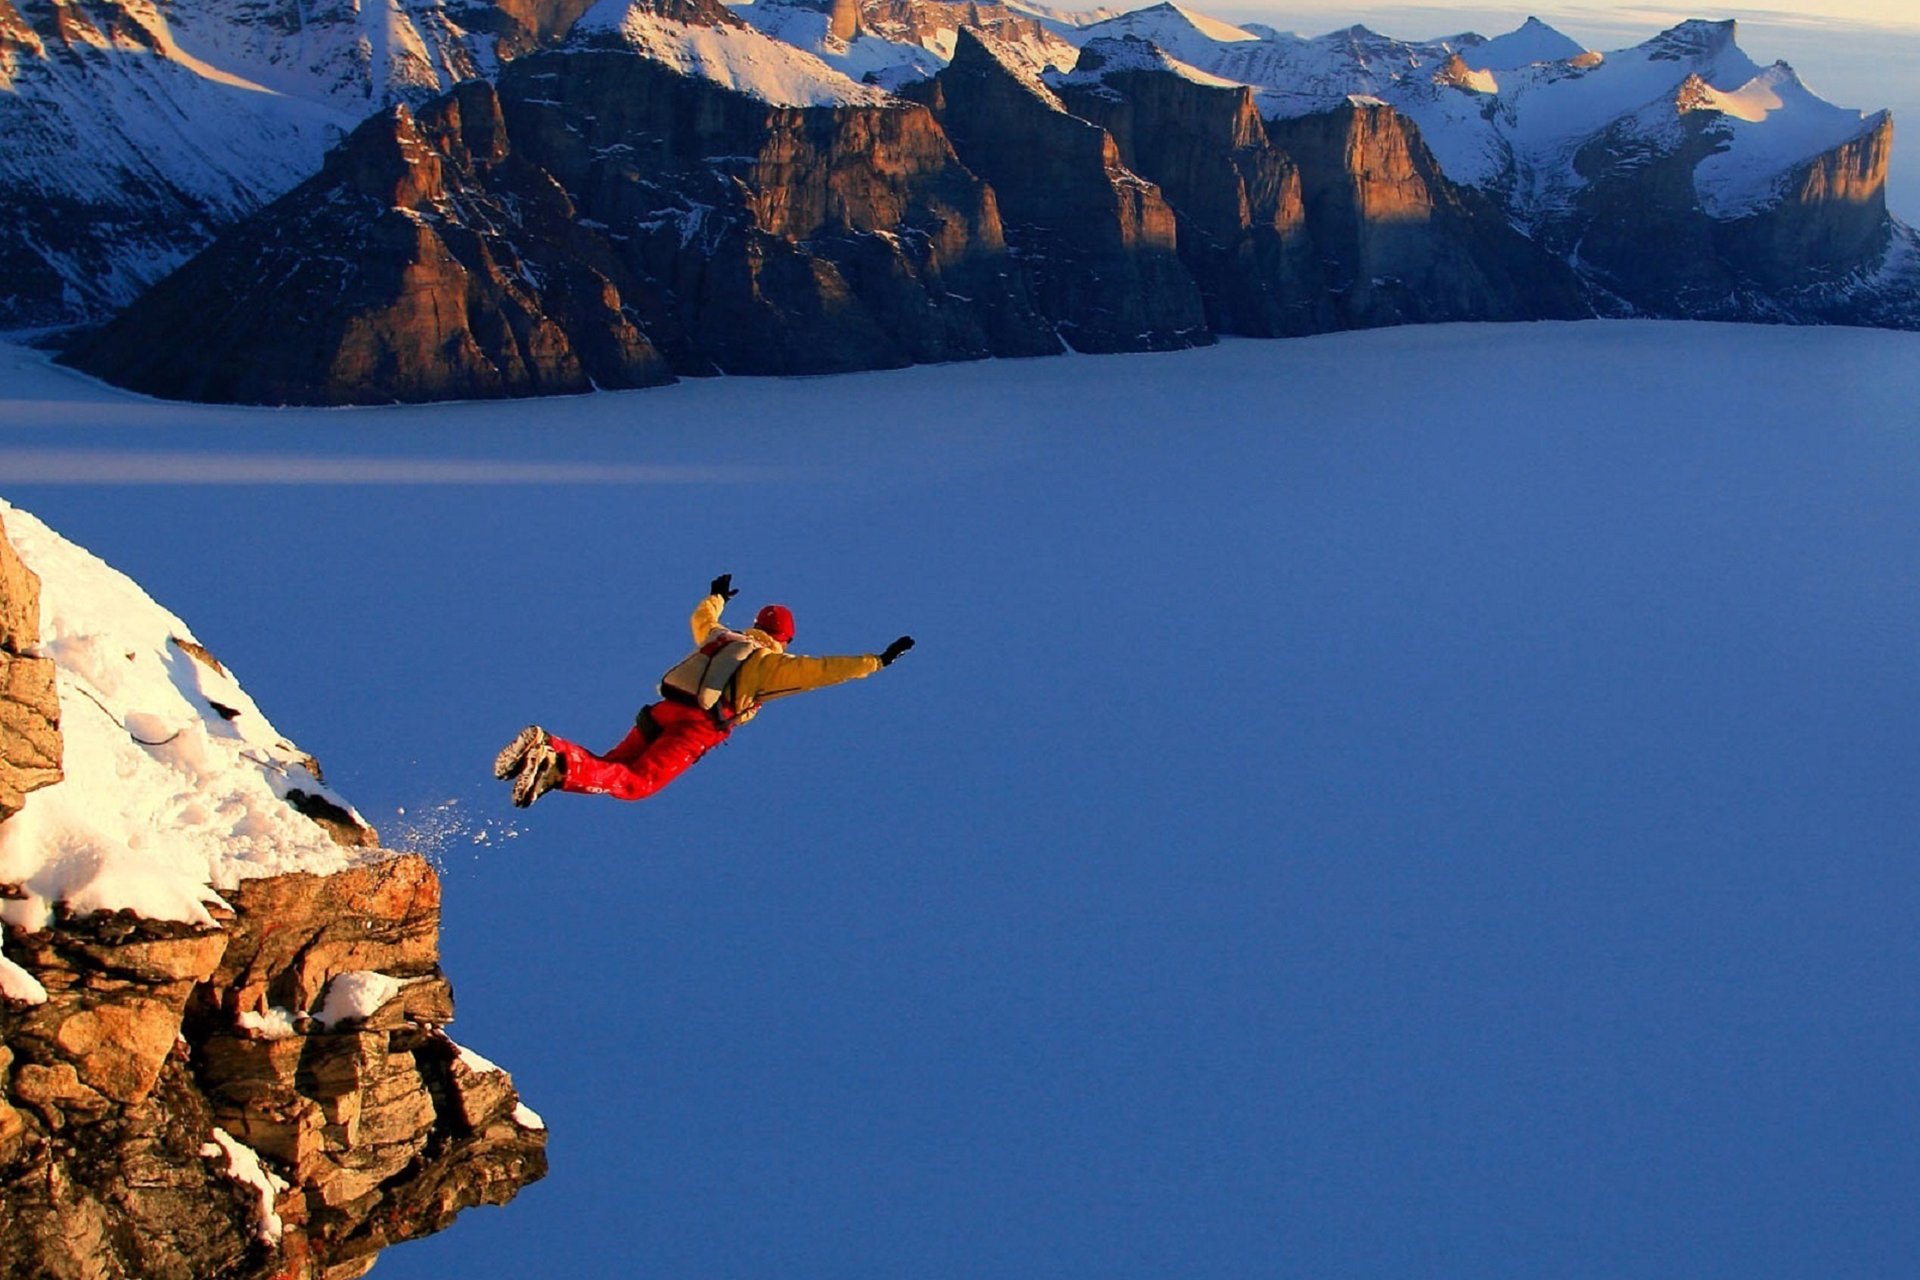 Photo of someone jumping from a snowy mountain